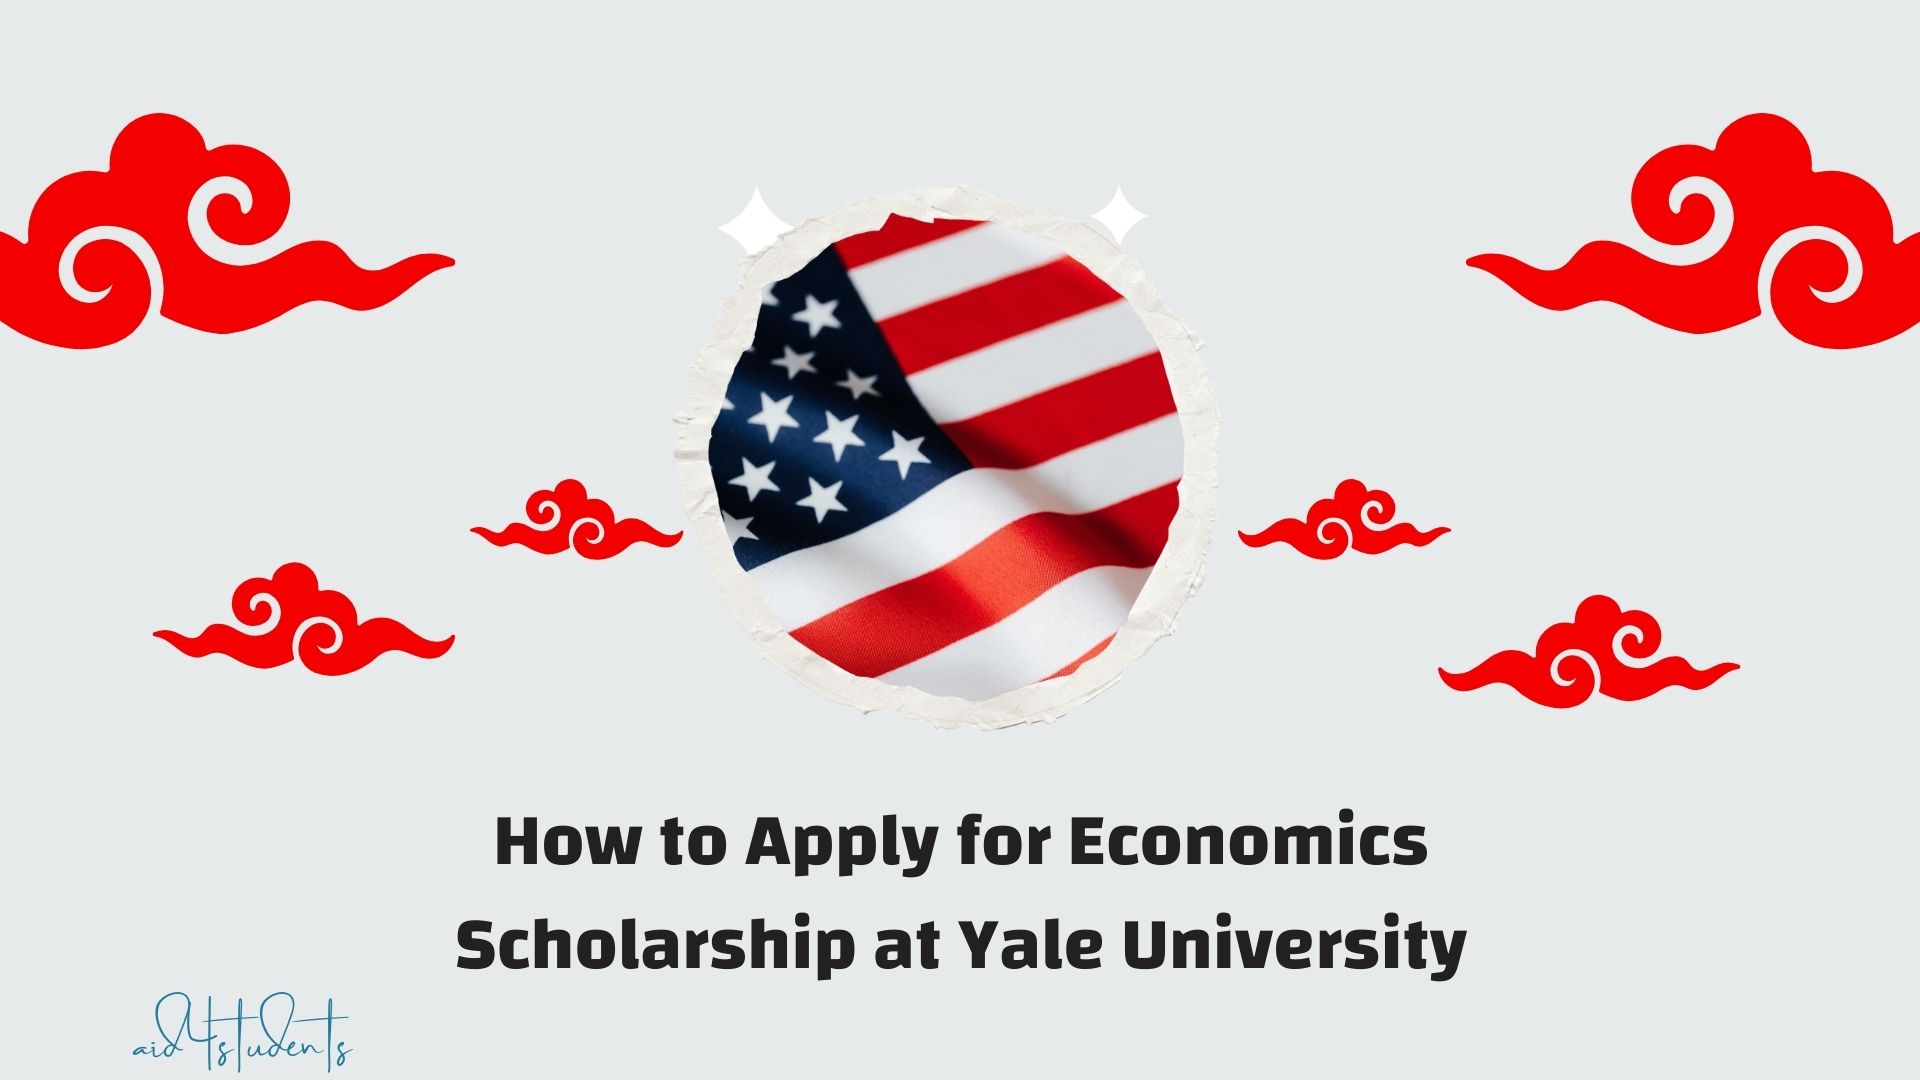 How to Apply for Economics Scholarship at Yale University